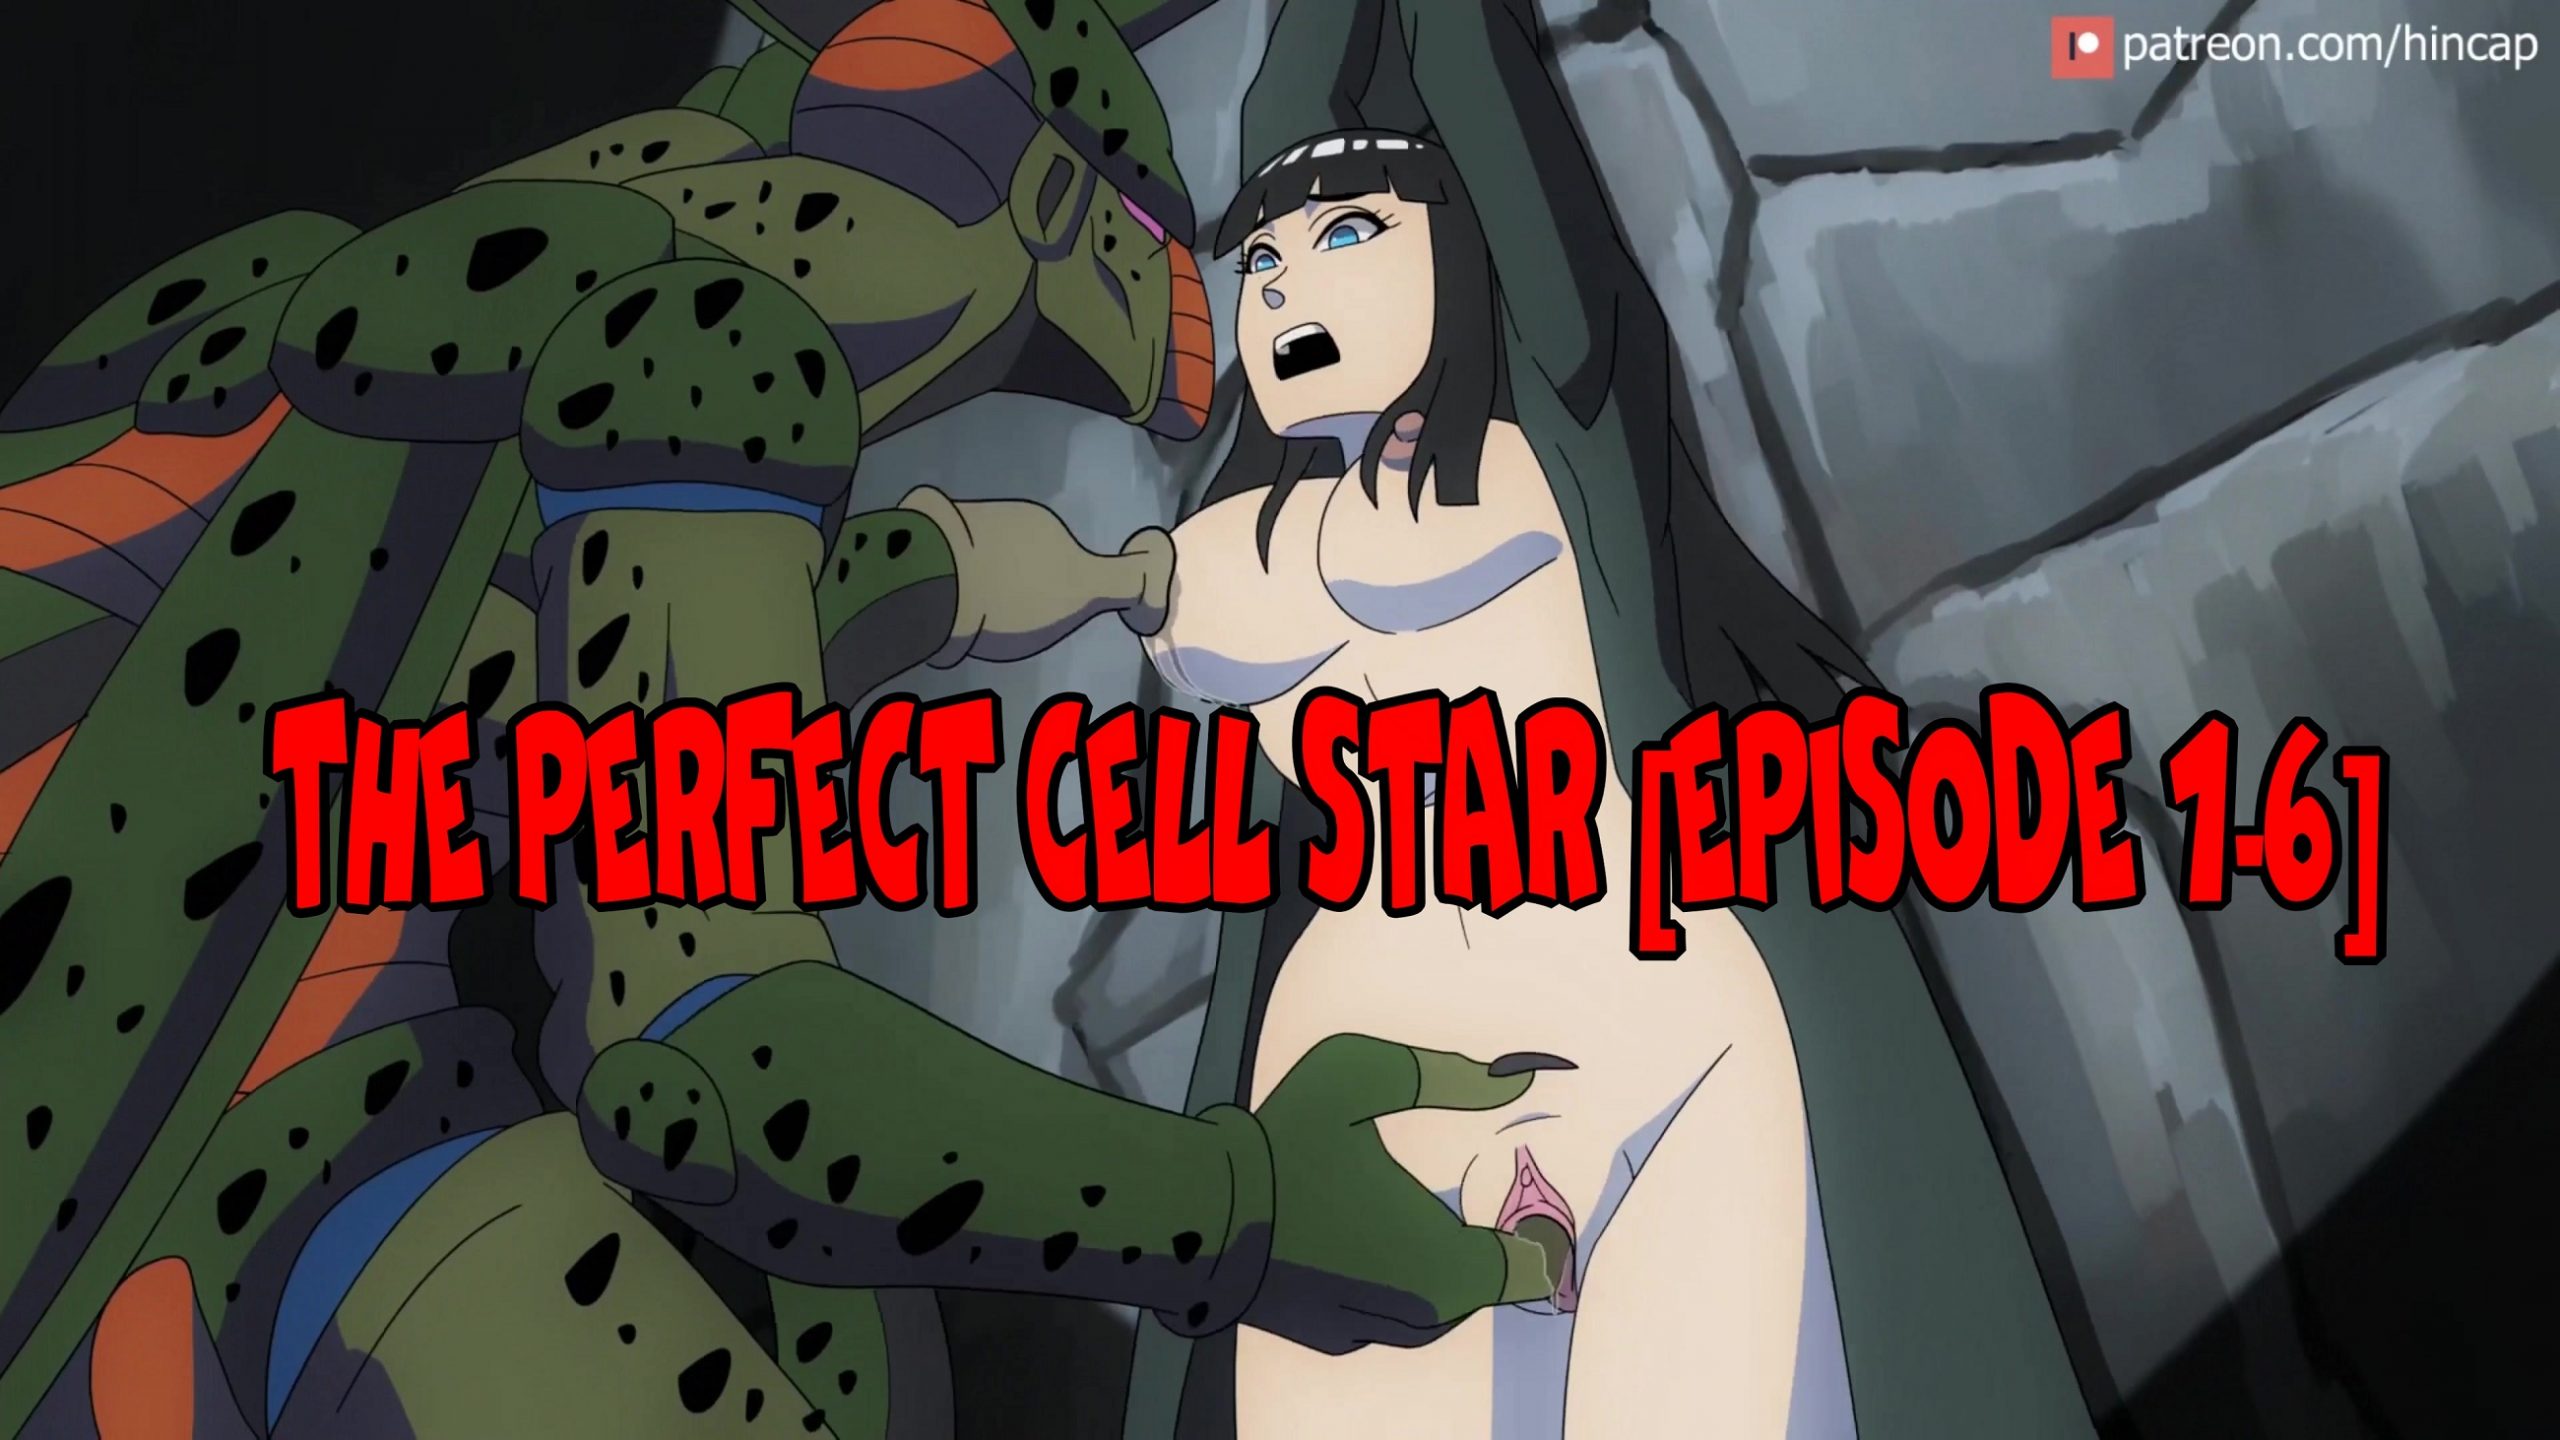 DOWNLOAD - The Perfect Cell Star [Episode 1-6] [4K] by Hincap.